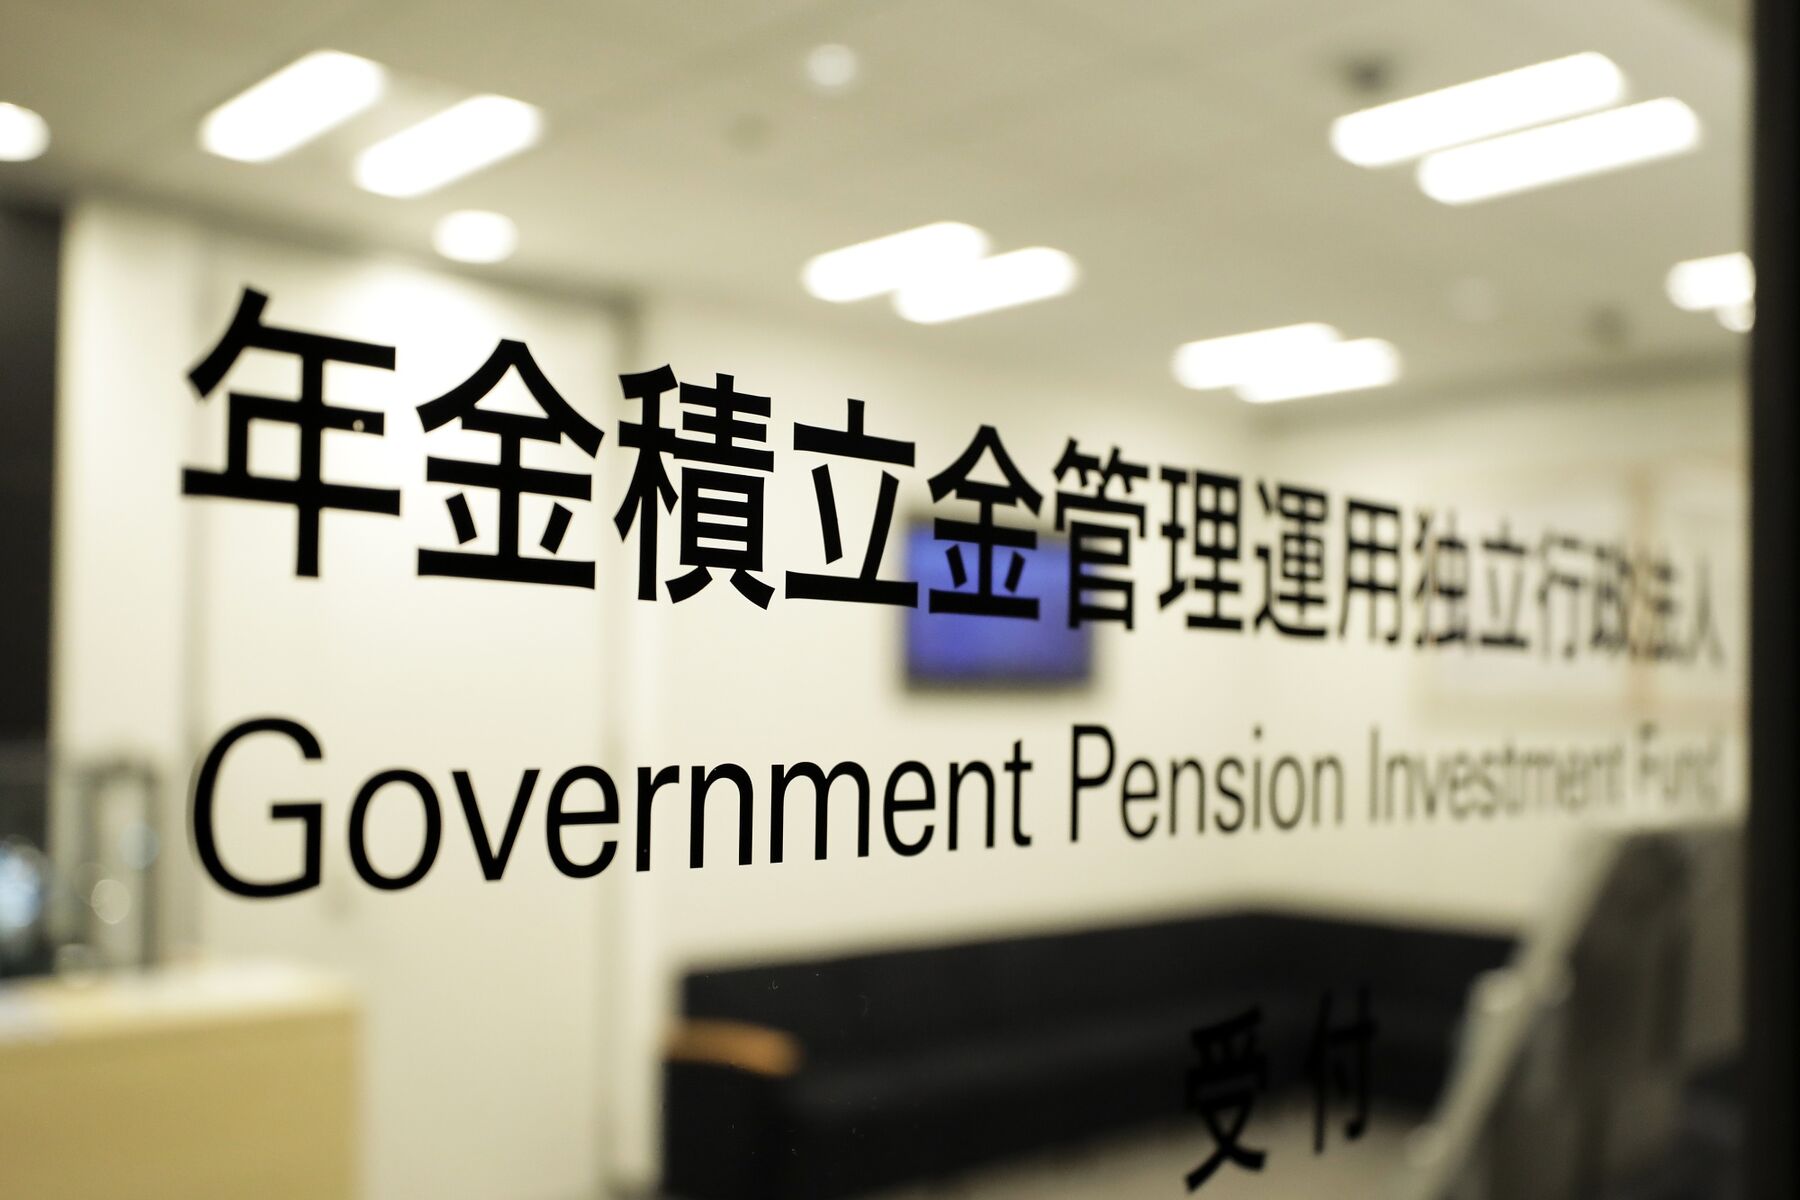 The Government Pension Investment Fund (GPIF) logo is displayed on a window at the GPIF headquarters in Tokyo, Japan.